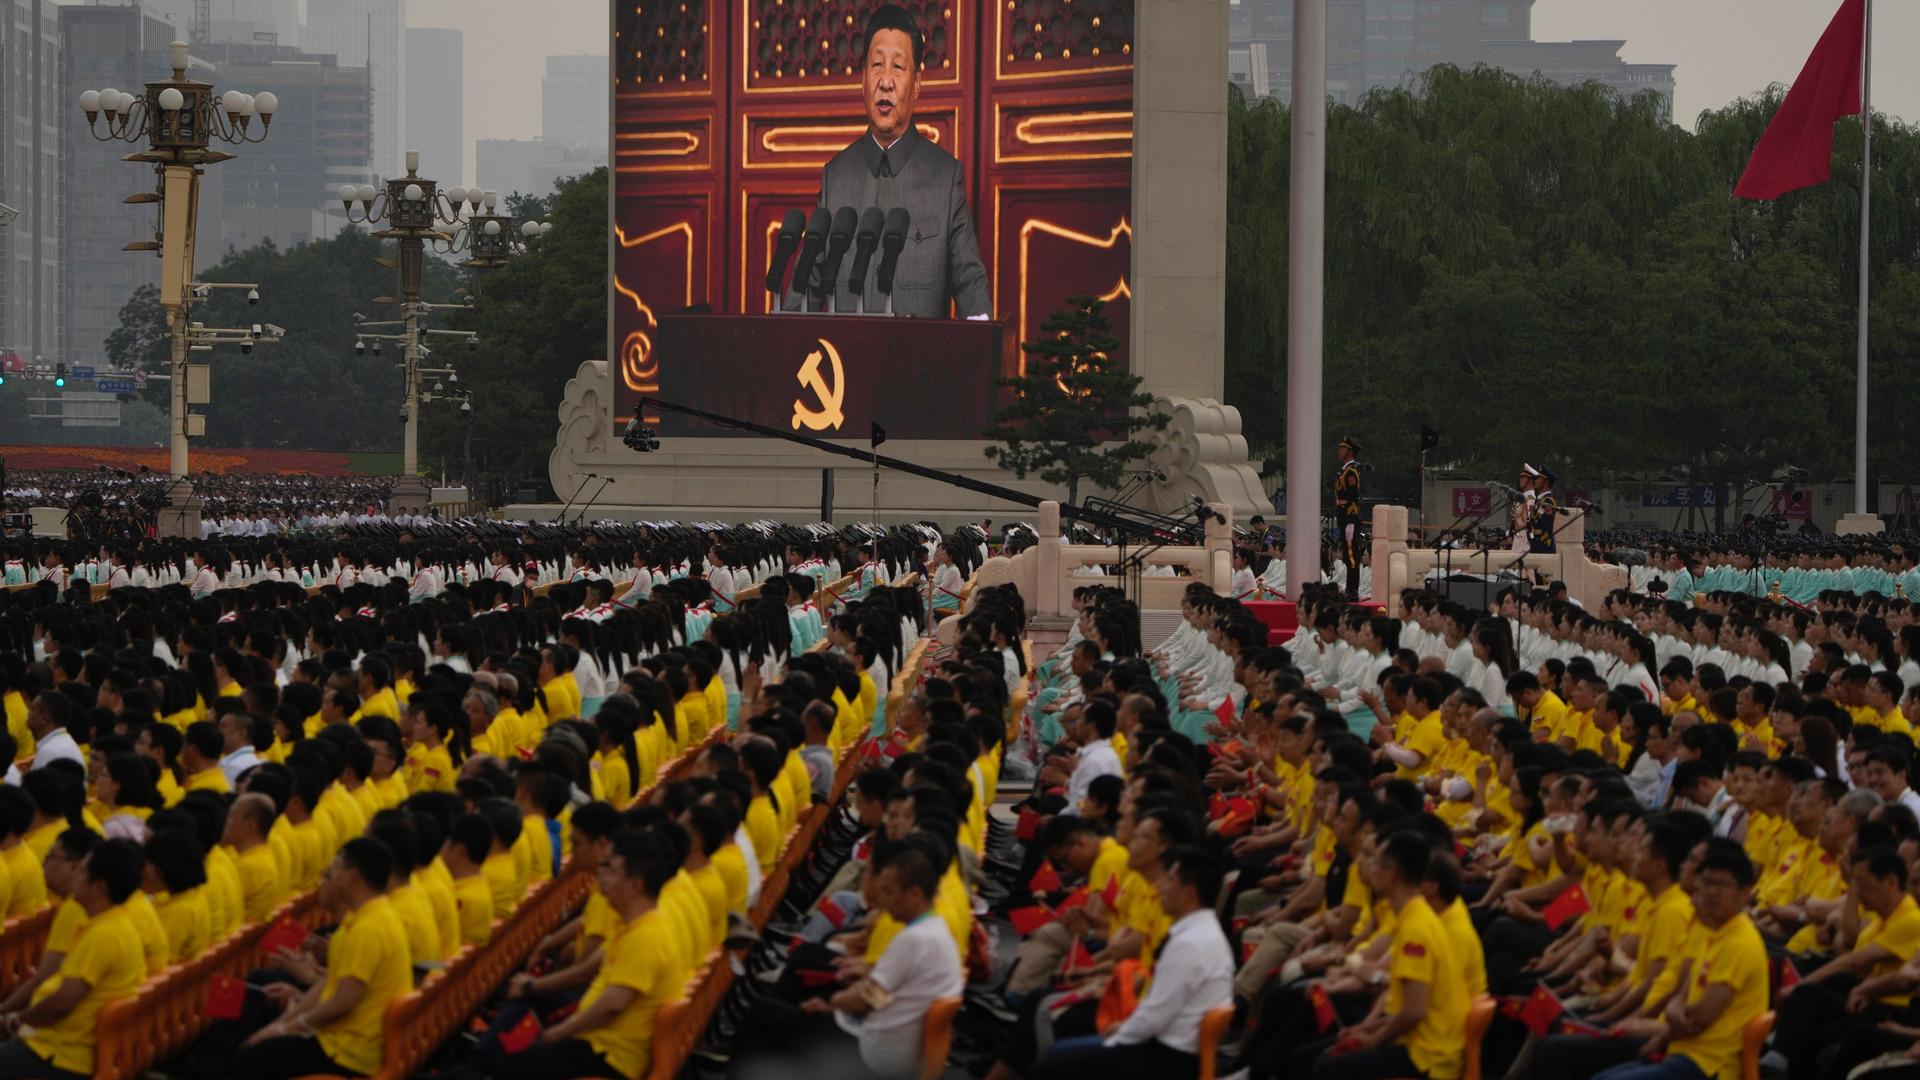 A screen shows Chinese President Xi Jinping speak during a ceremony to mark the 100th anniversary of the founding of the ruling Chinese Communist Party at Tiananmen Square in Beijing, July 1, 2021.